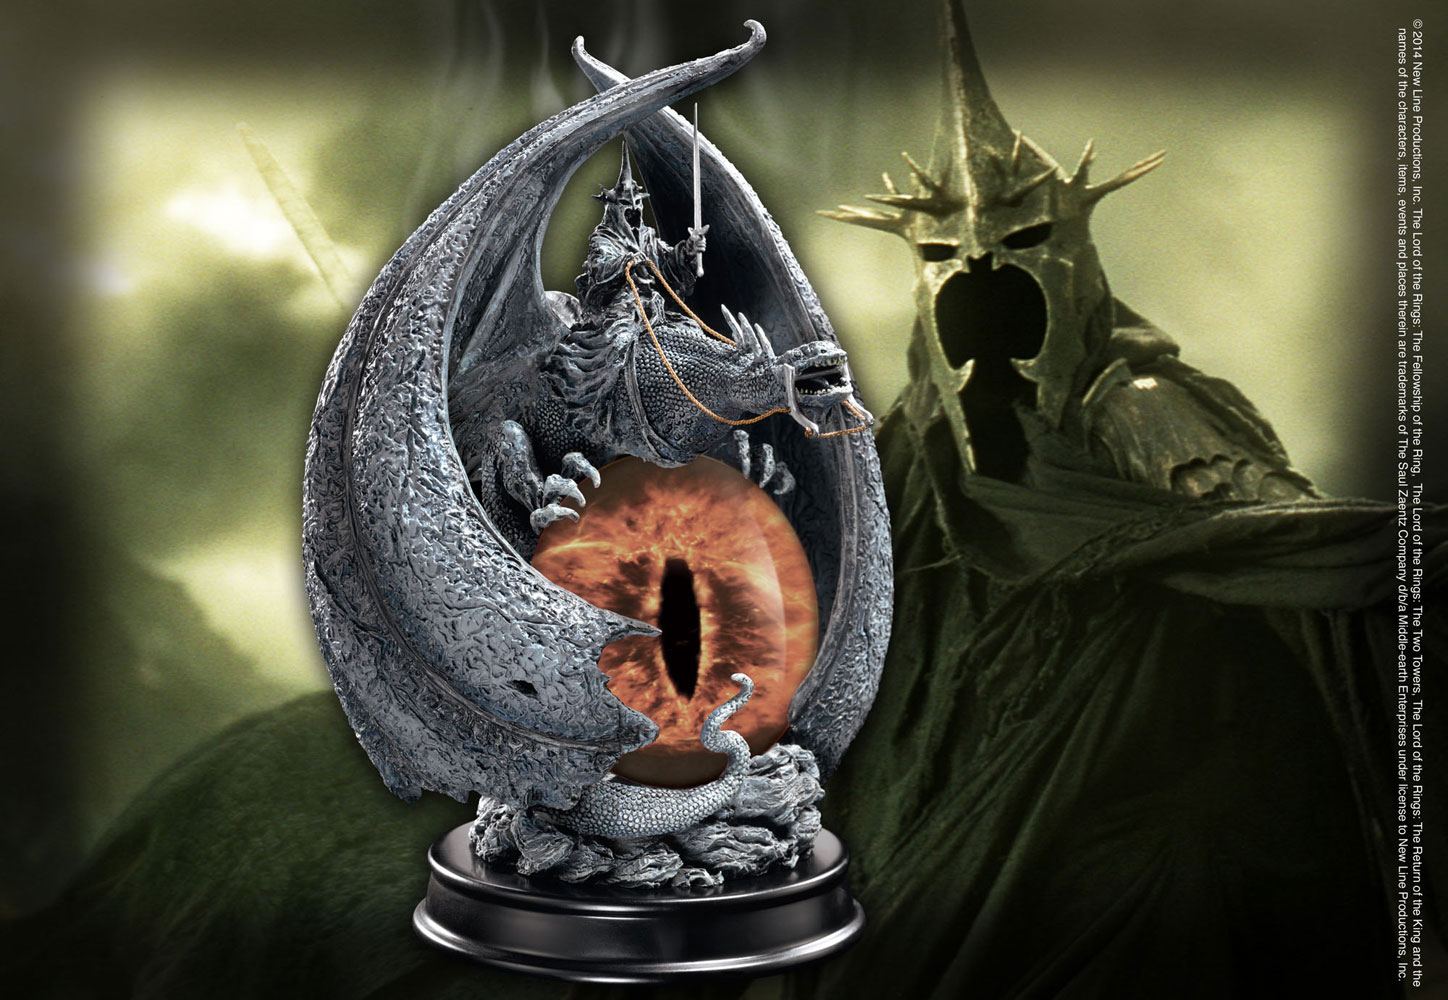 Lord of the Rings Statue The Fury of the Witch King 20 cm